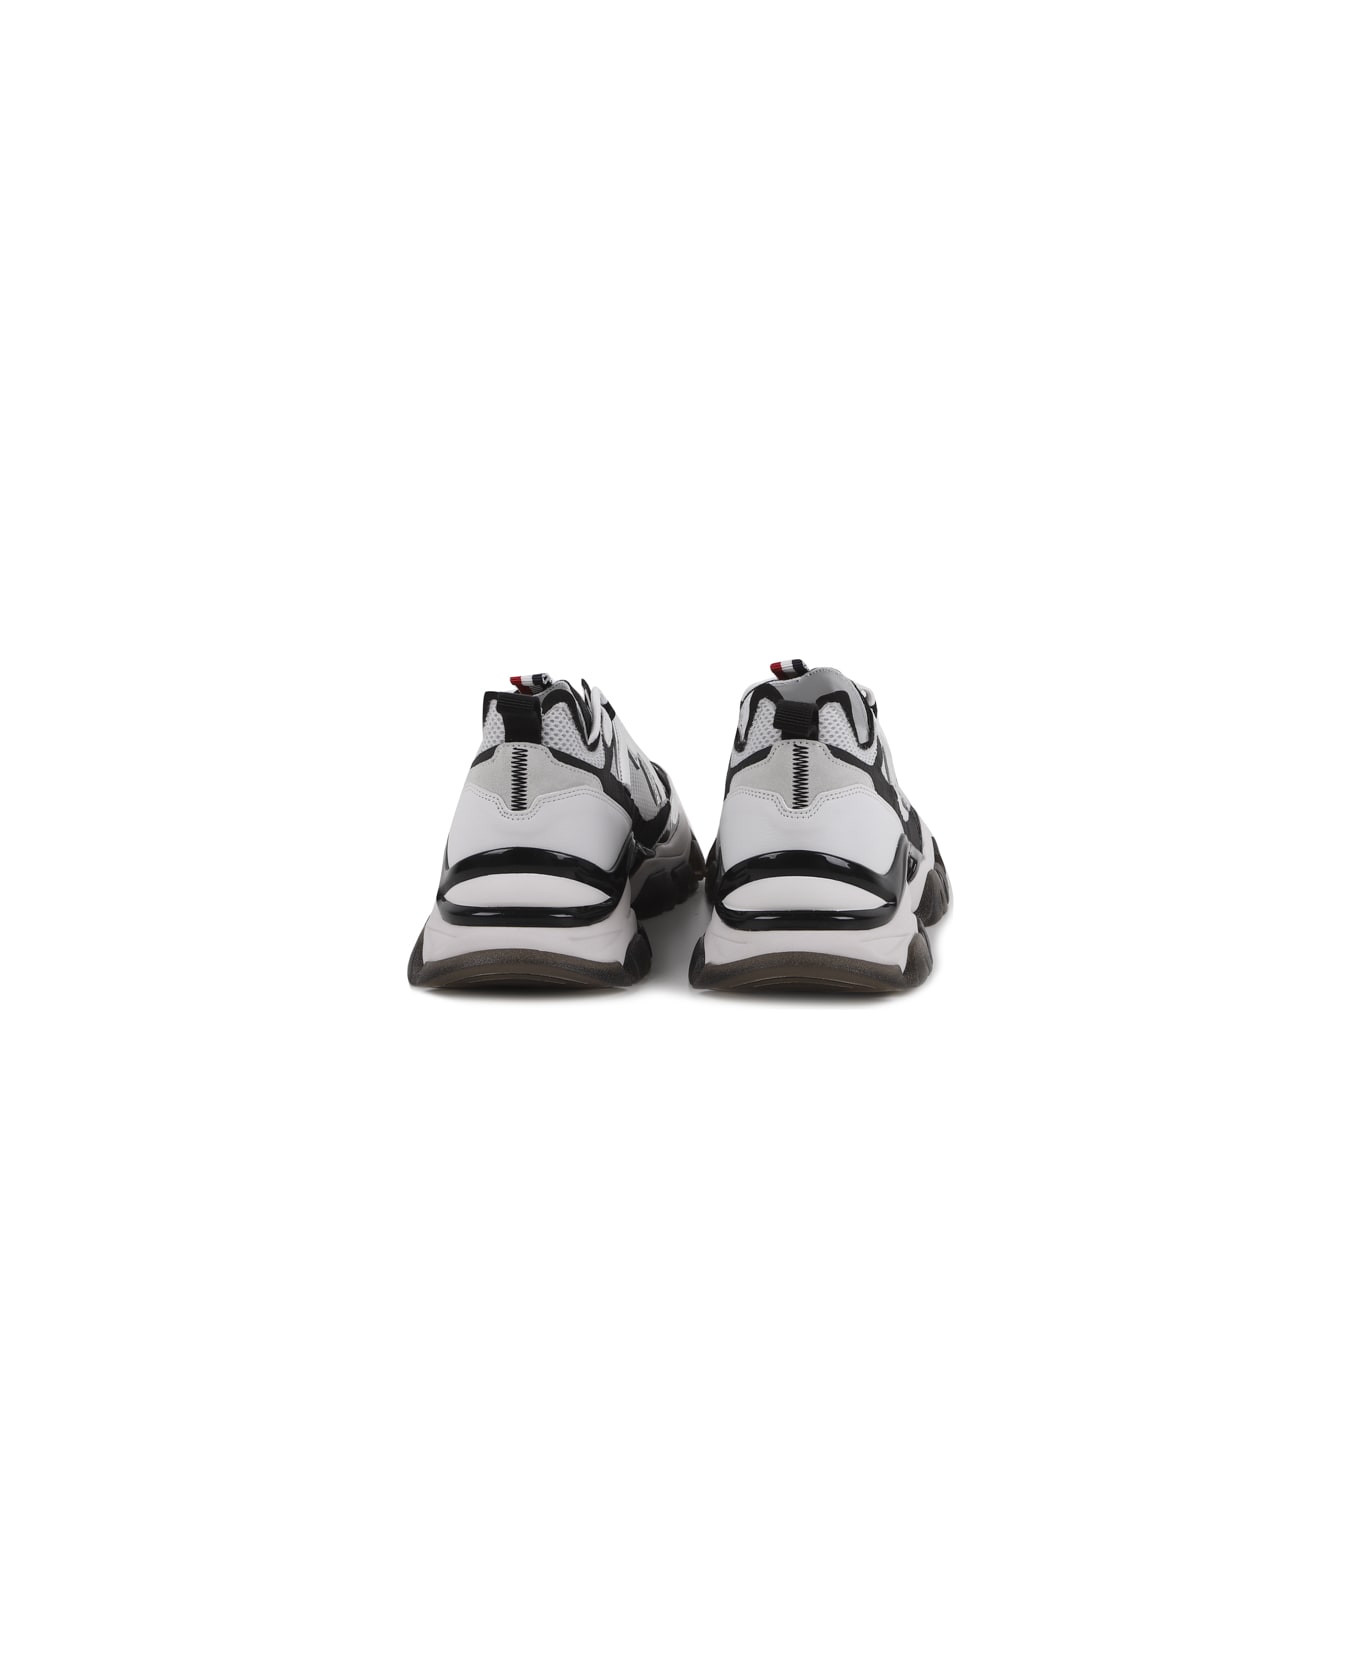 Moncler Leave No Trace Sneakers - White, black